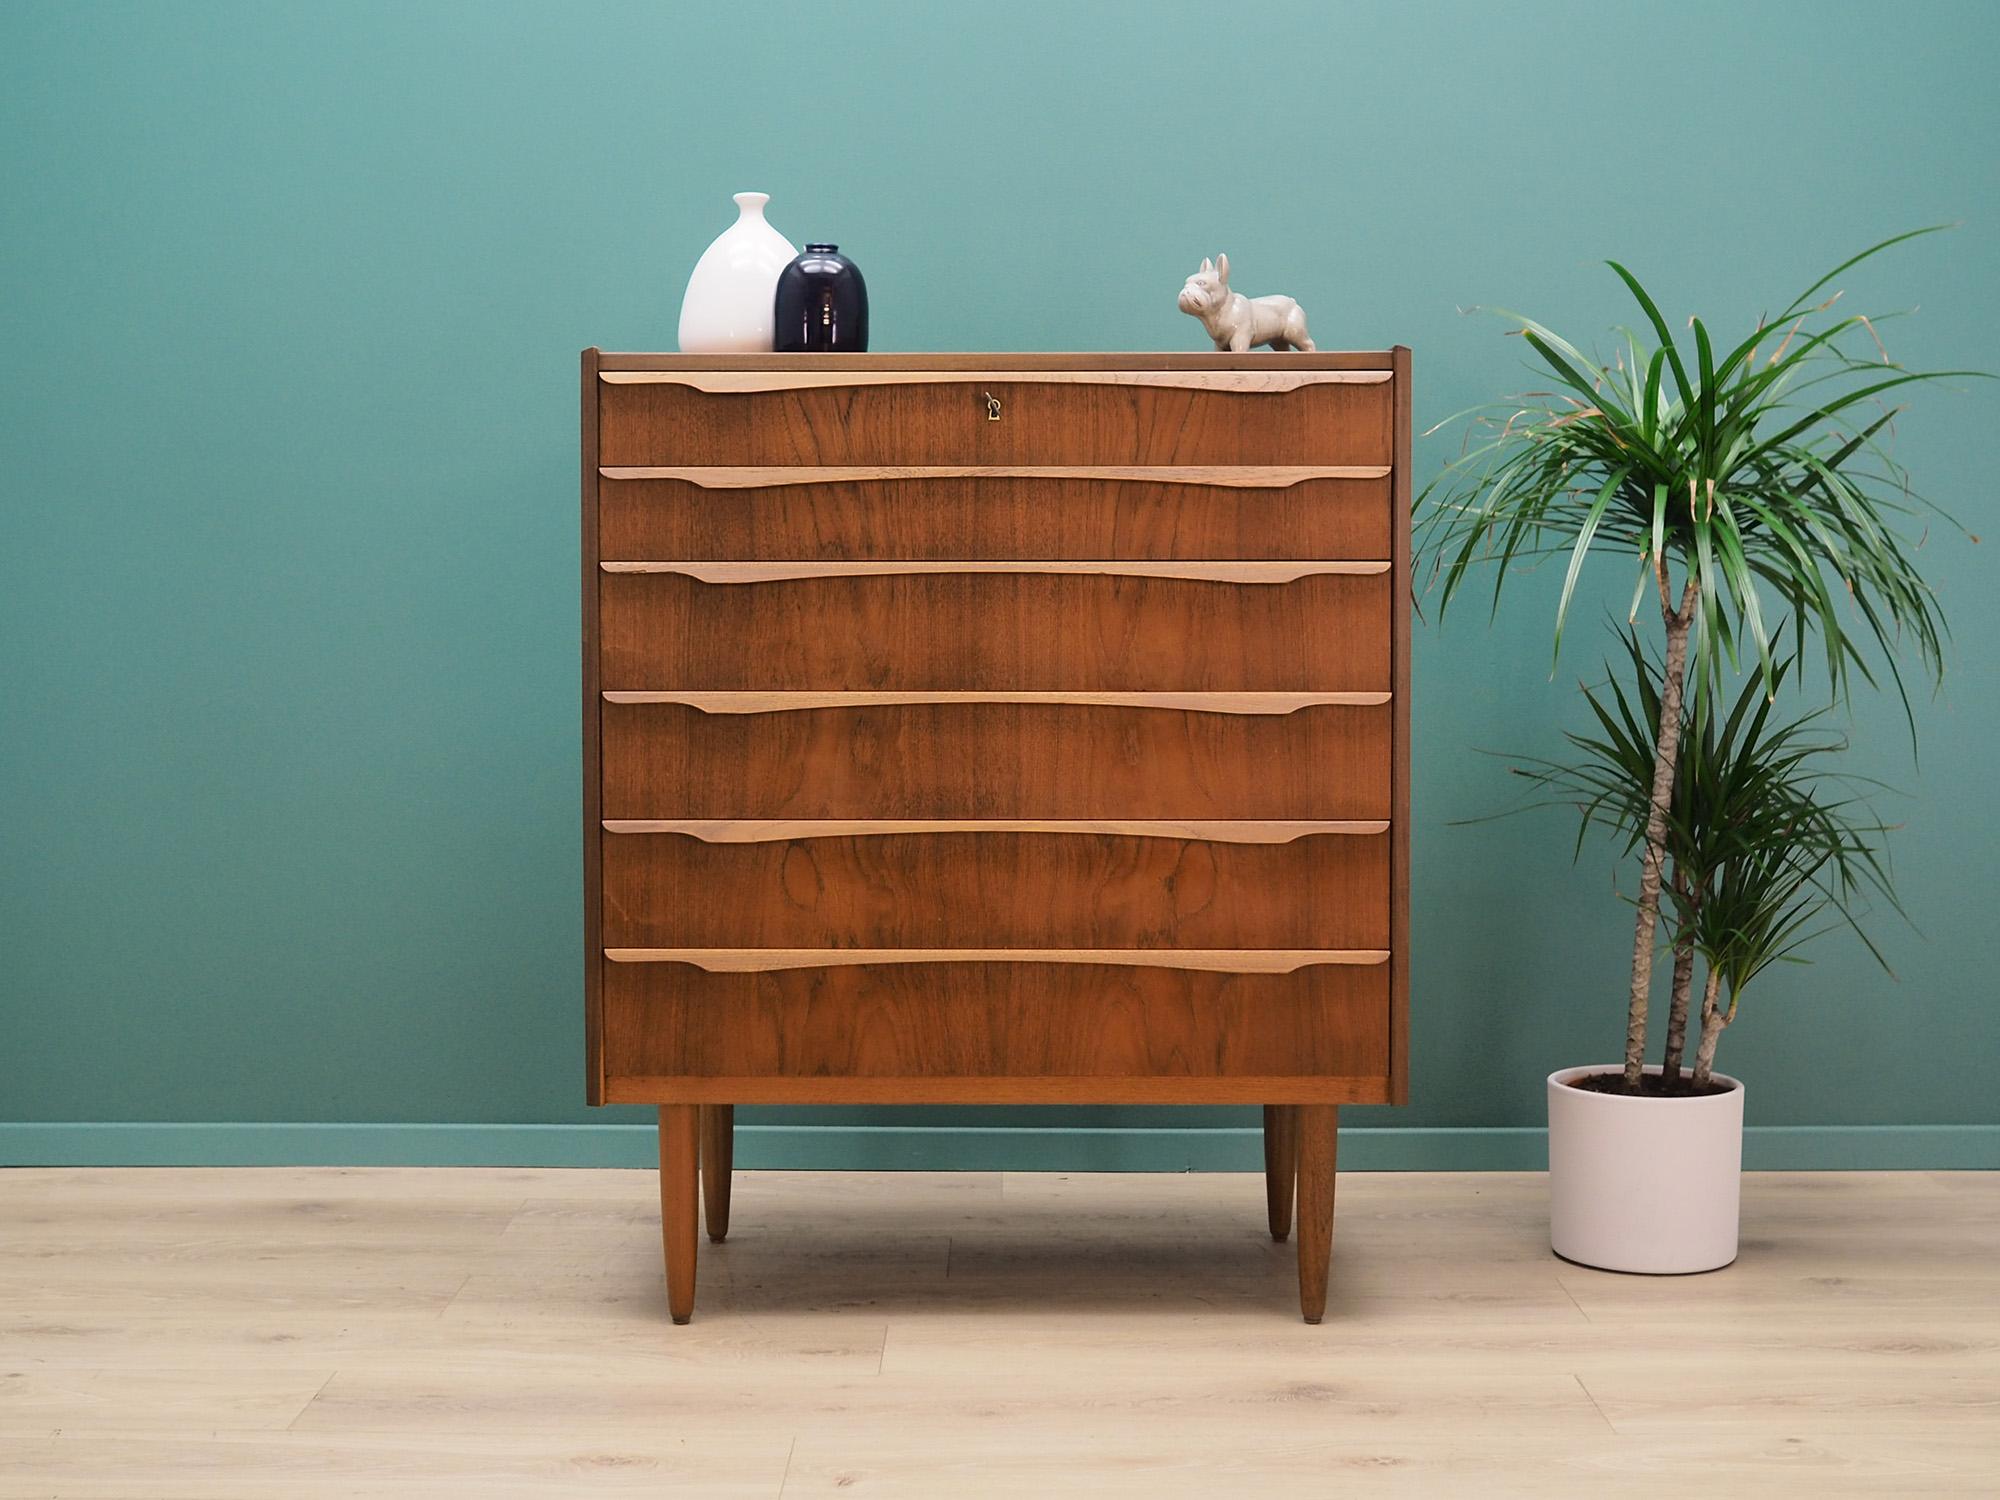 Fantastic chest of drawers from the 60 / 70's. Danish design, minimalist form. Surface of the furniture is covered with teak veneer, legs are made of solid teak wood. Furniture has six stylish drawers, a key included. Preserved in good condition